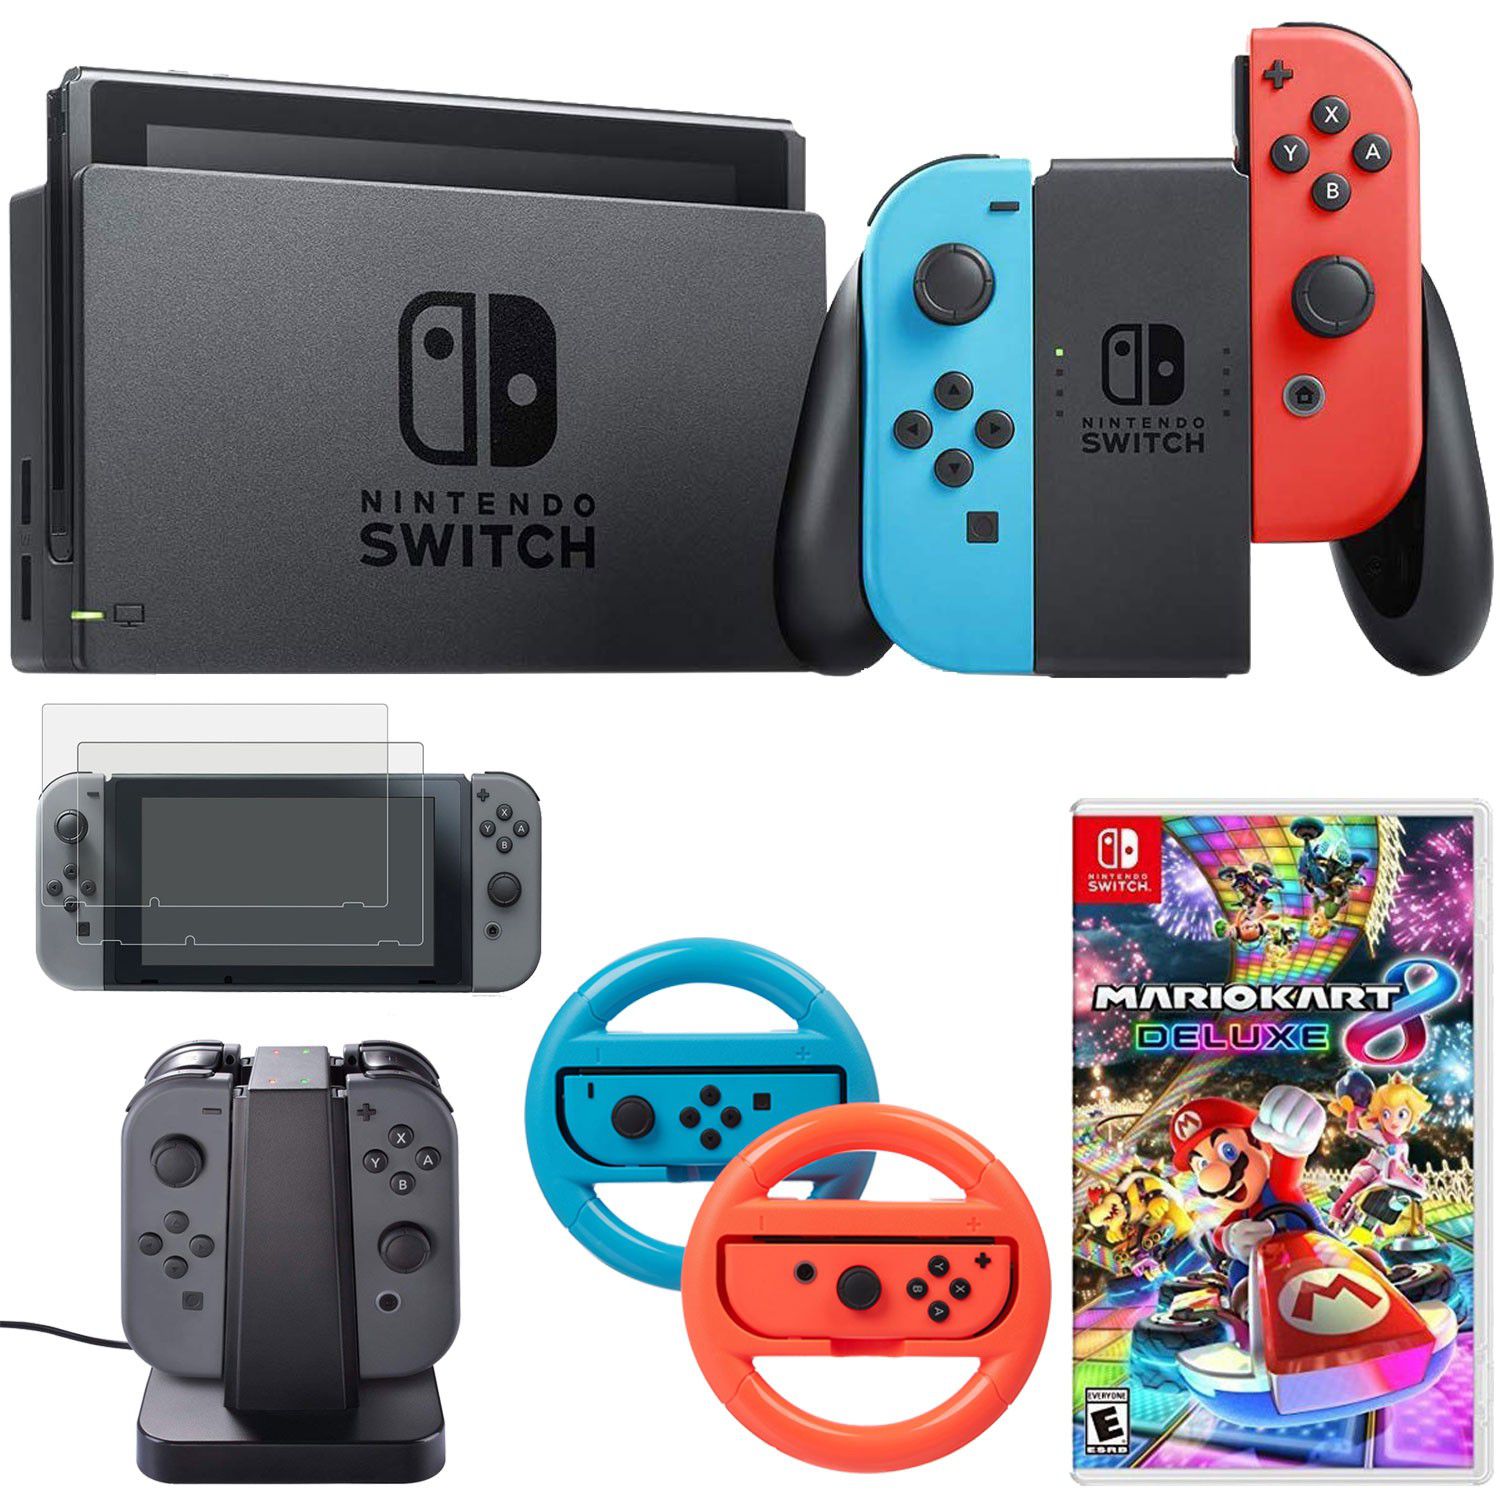 Nintendo Switch With Mario Kart + Accessories $70 OFF Retail